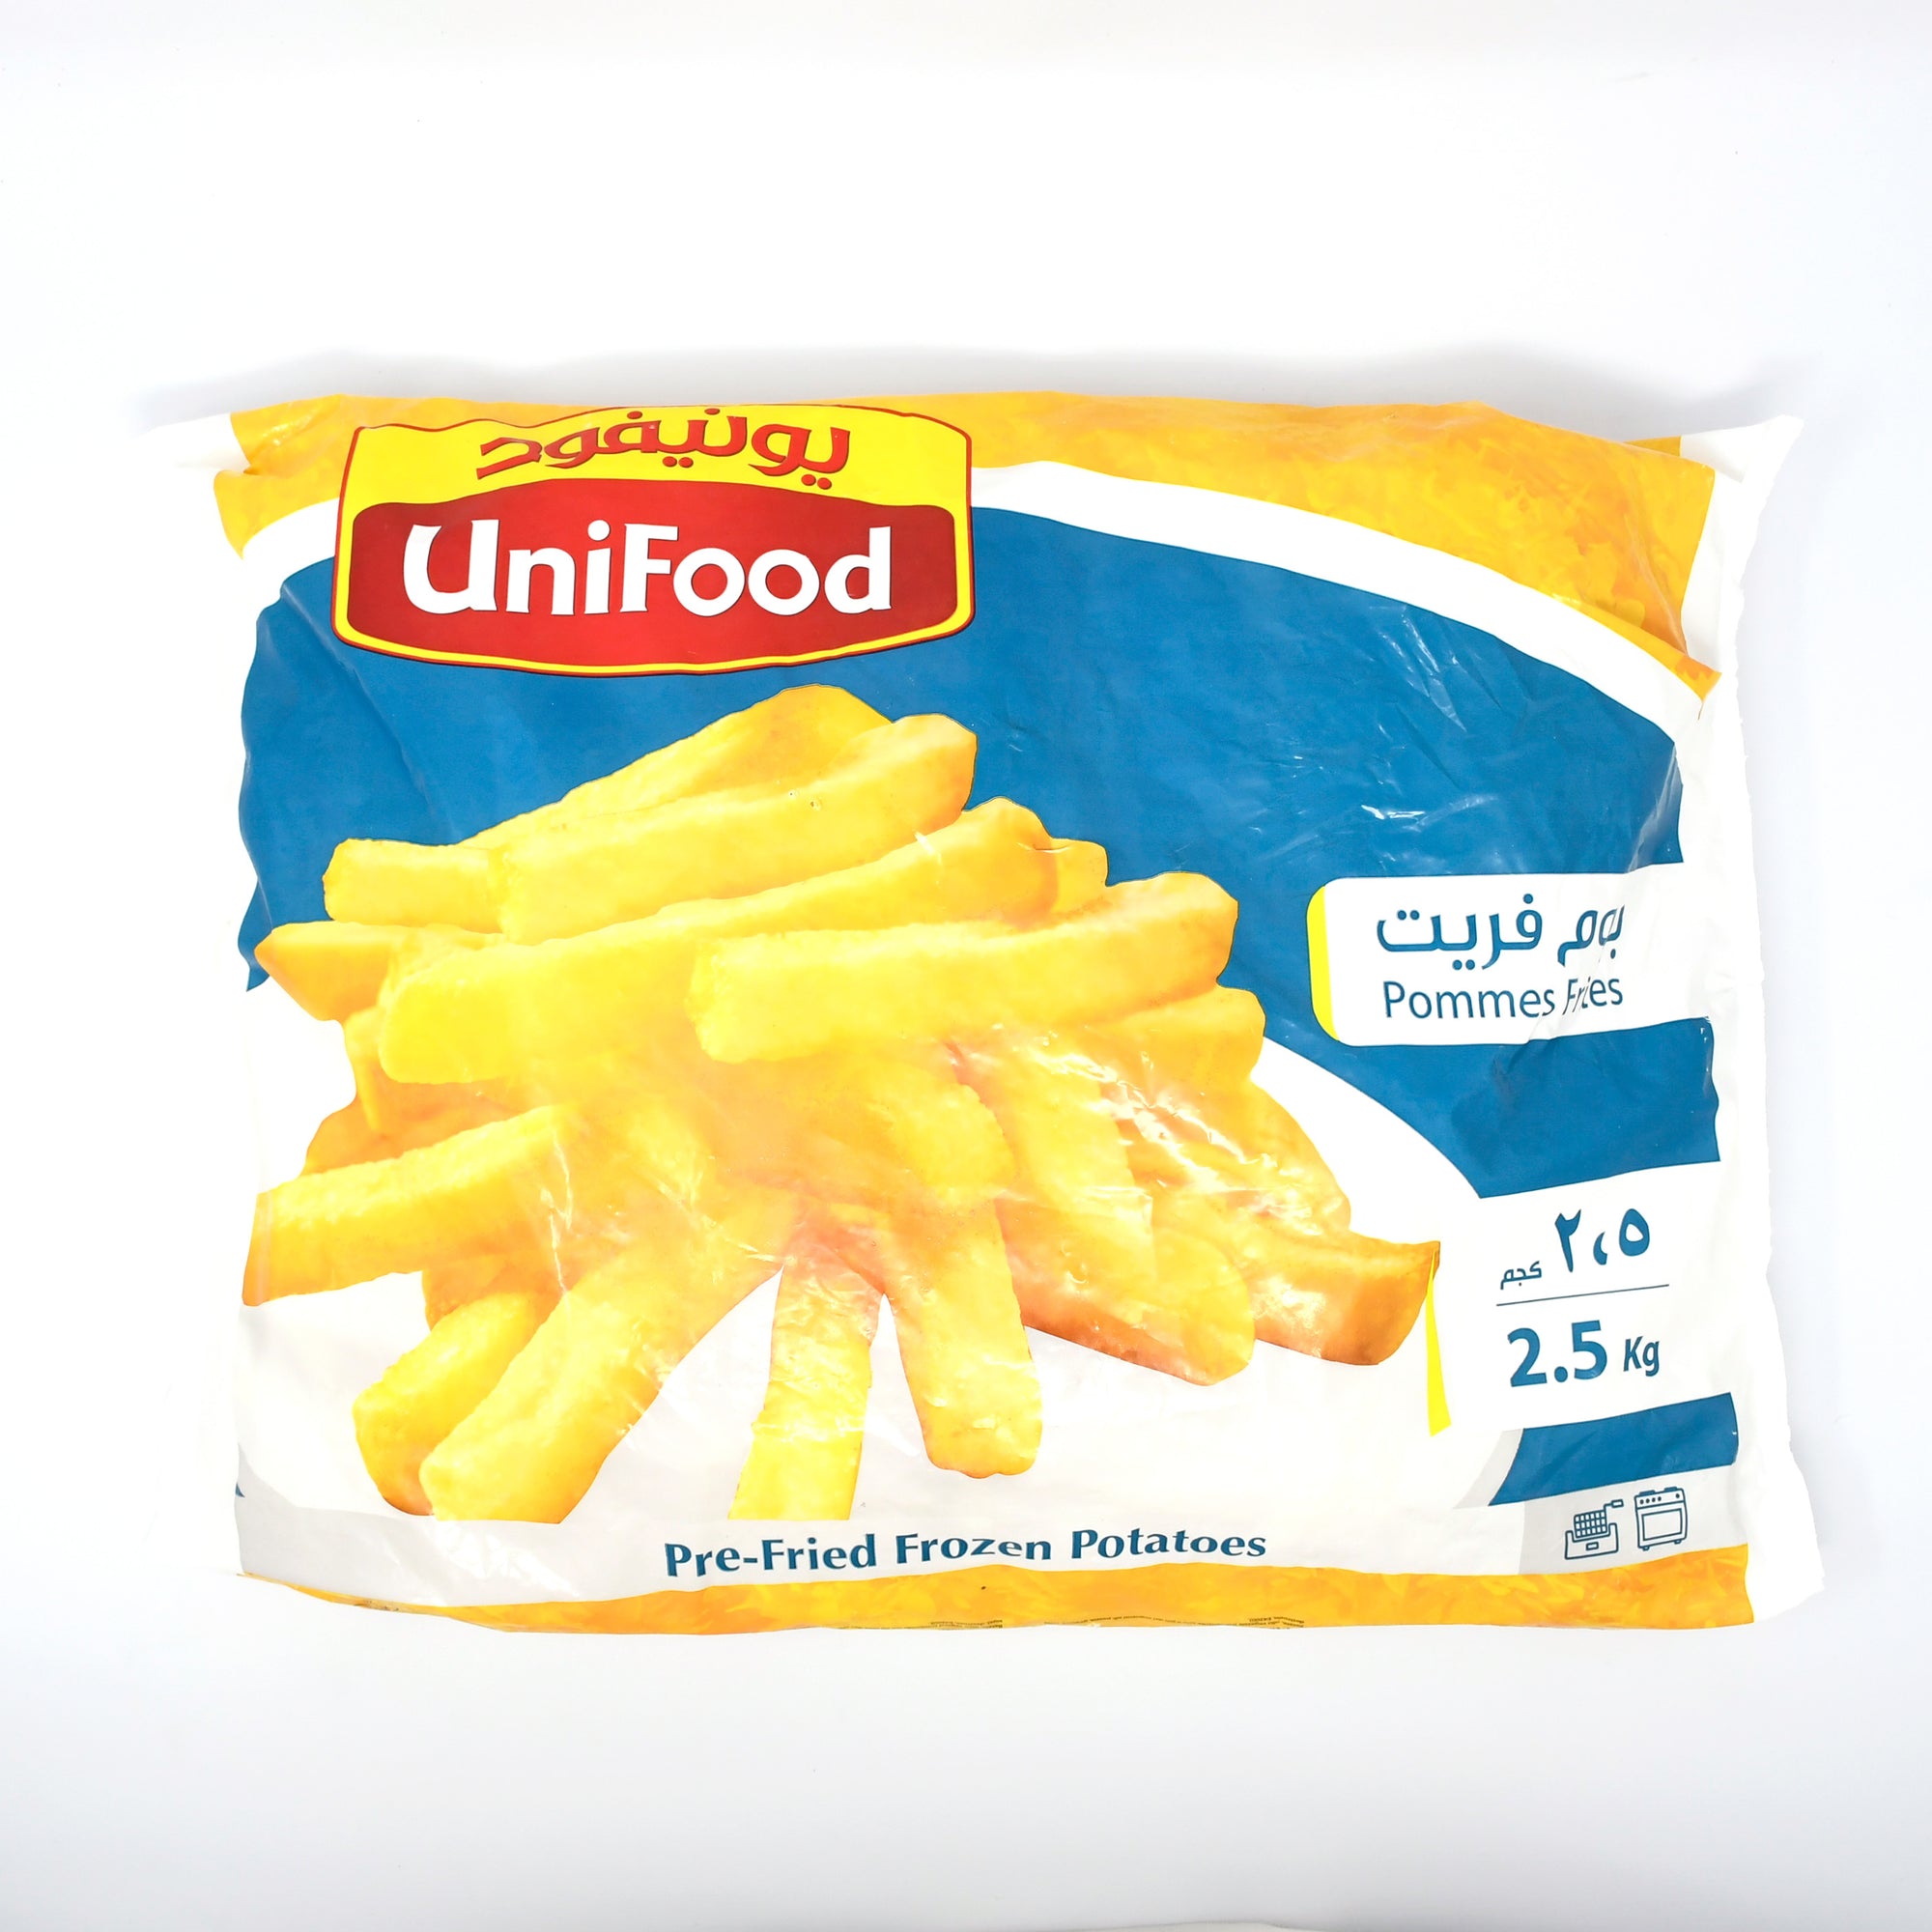 9X9 FRENCH FRIES (POMME FRITES) (2.5kg)